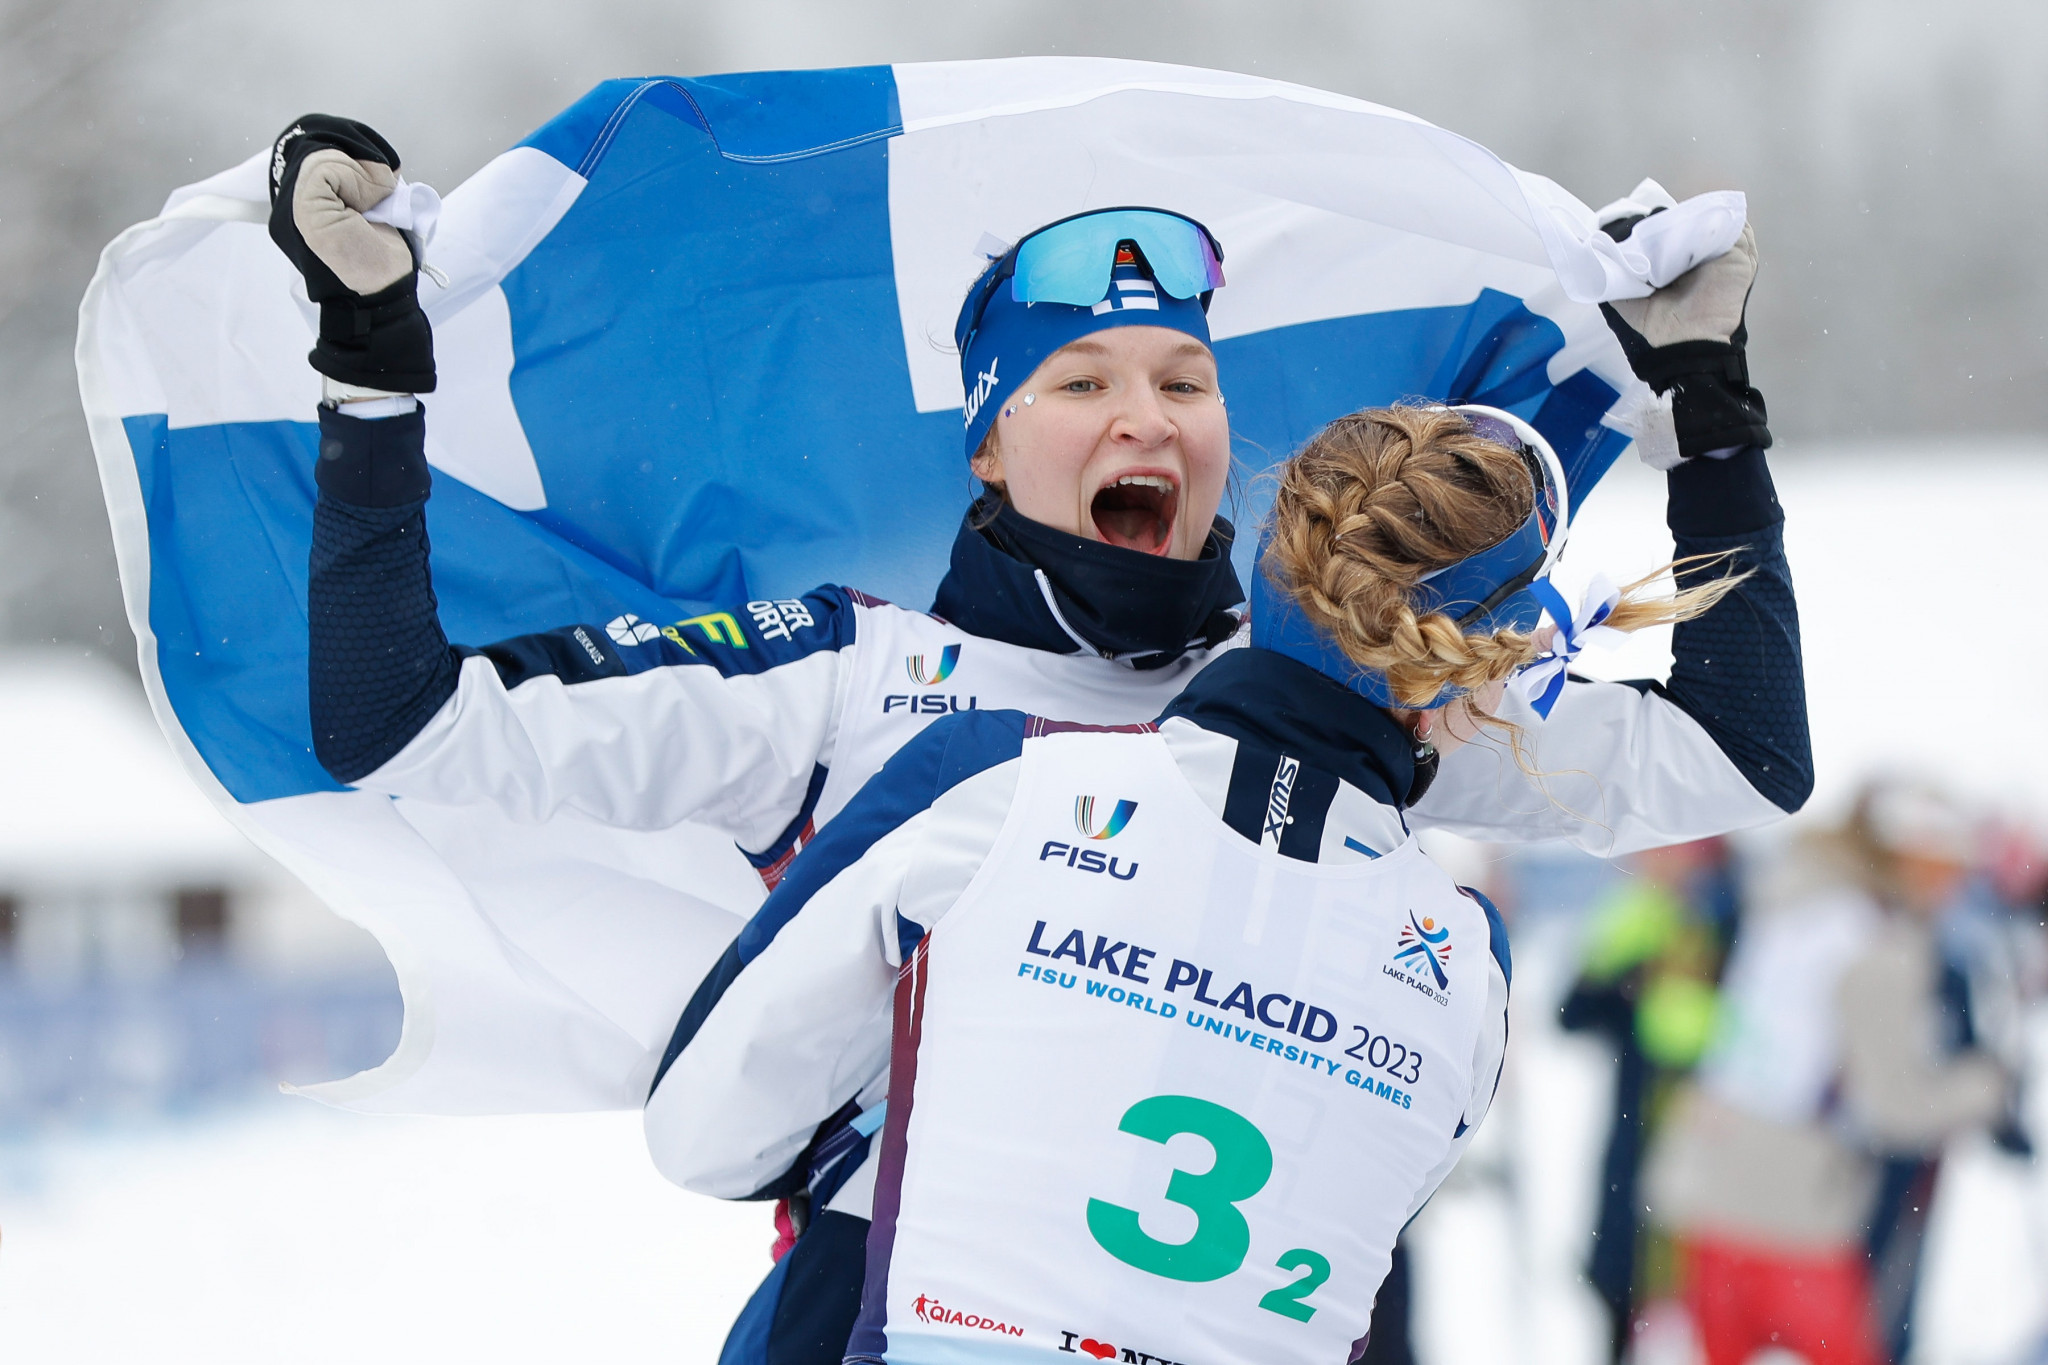 Finland celebrate after winning the women's 3x5km cross-country skiing relay after benefiting from a mistake from Japan ©FISU